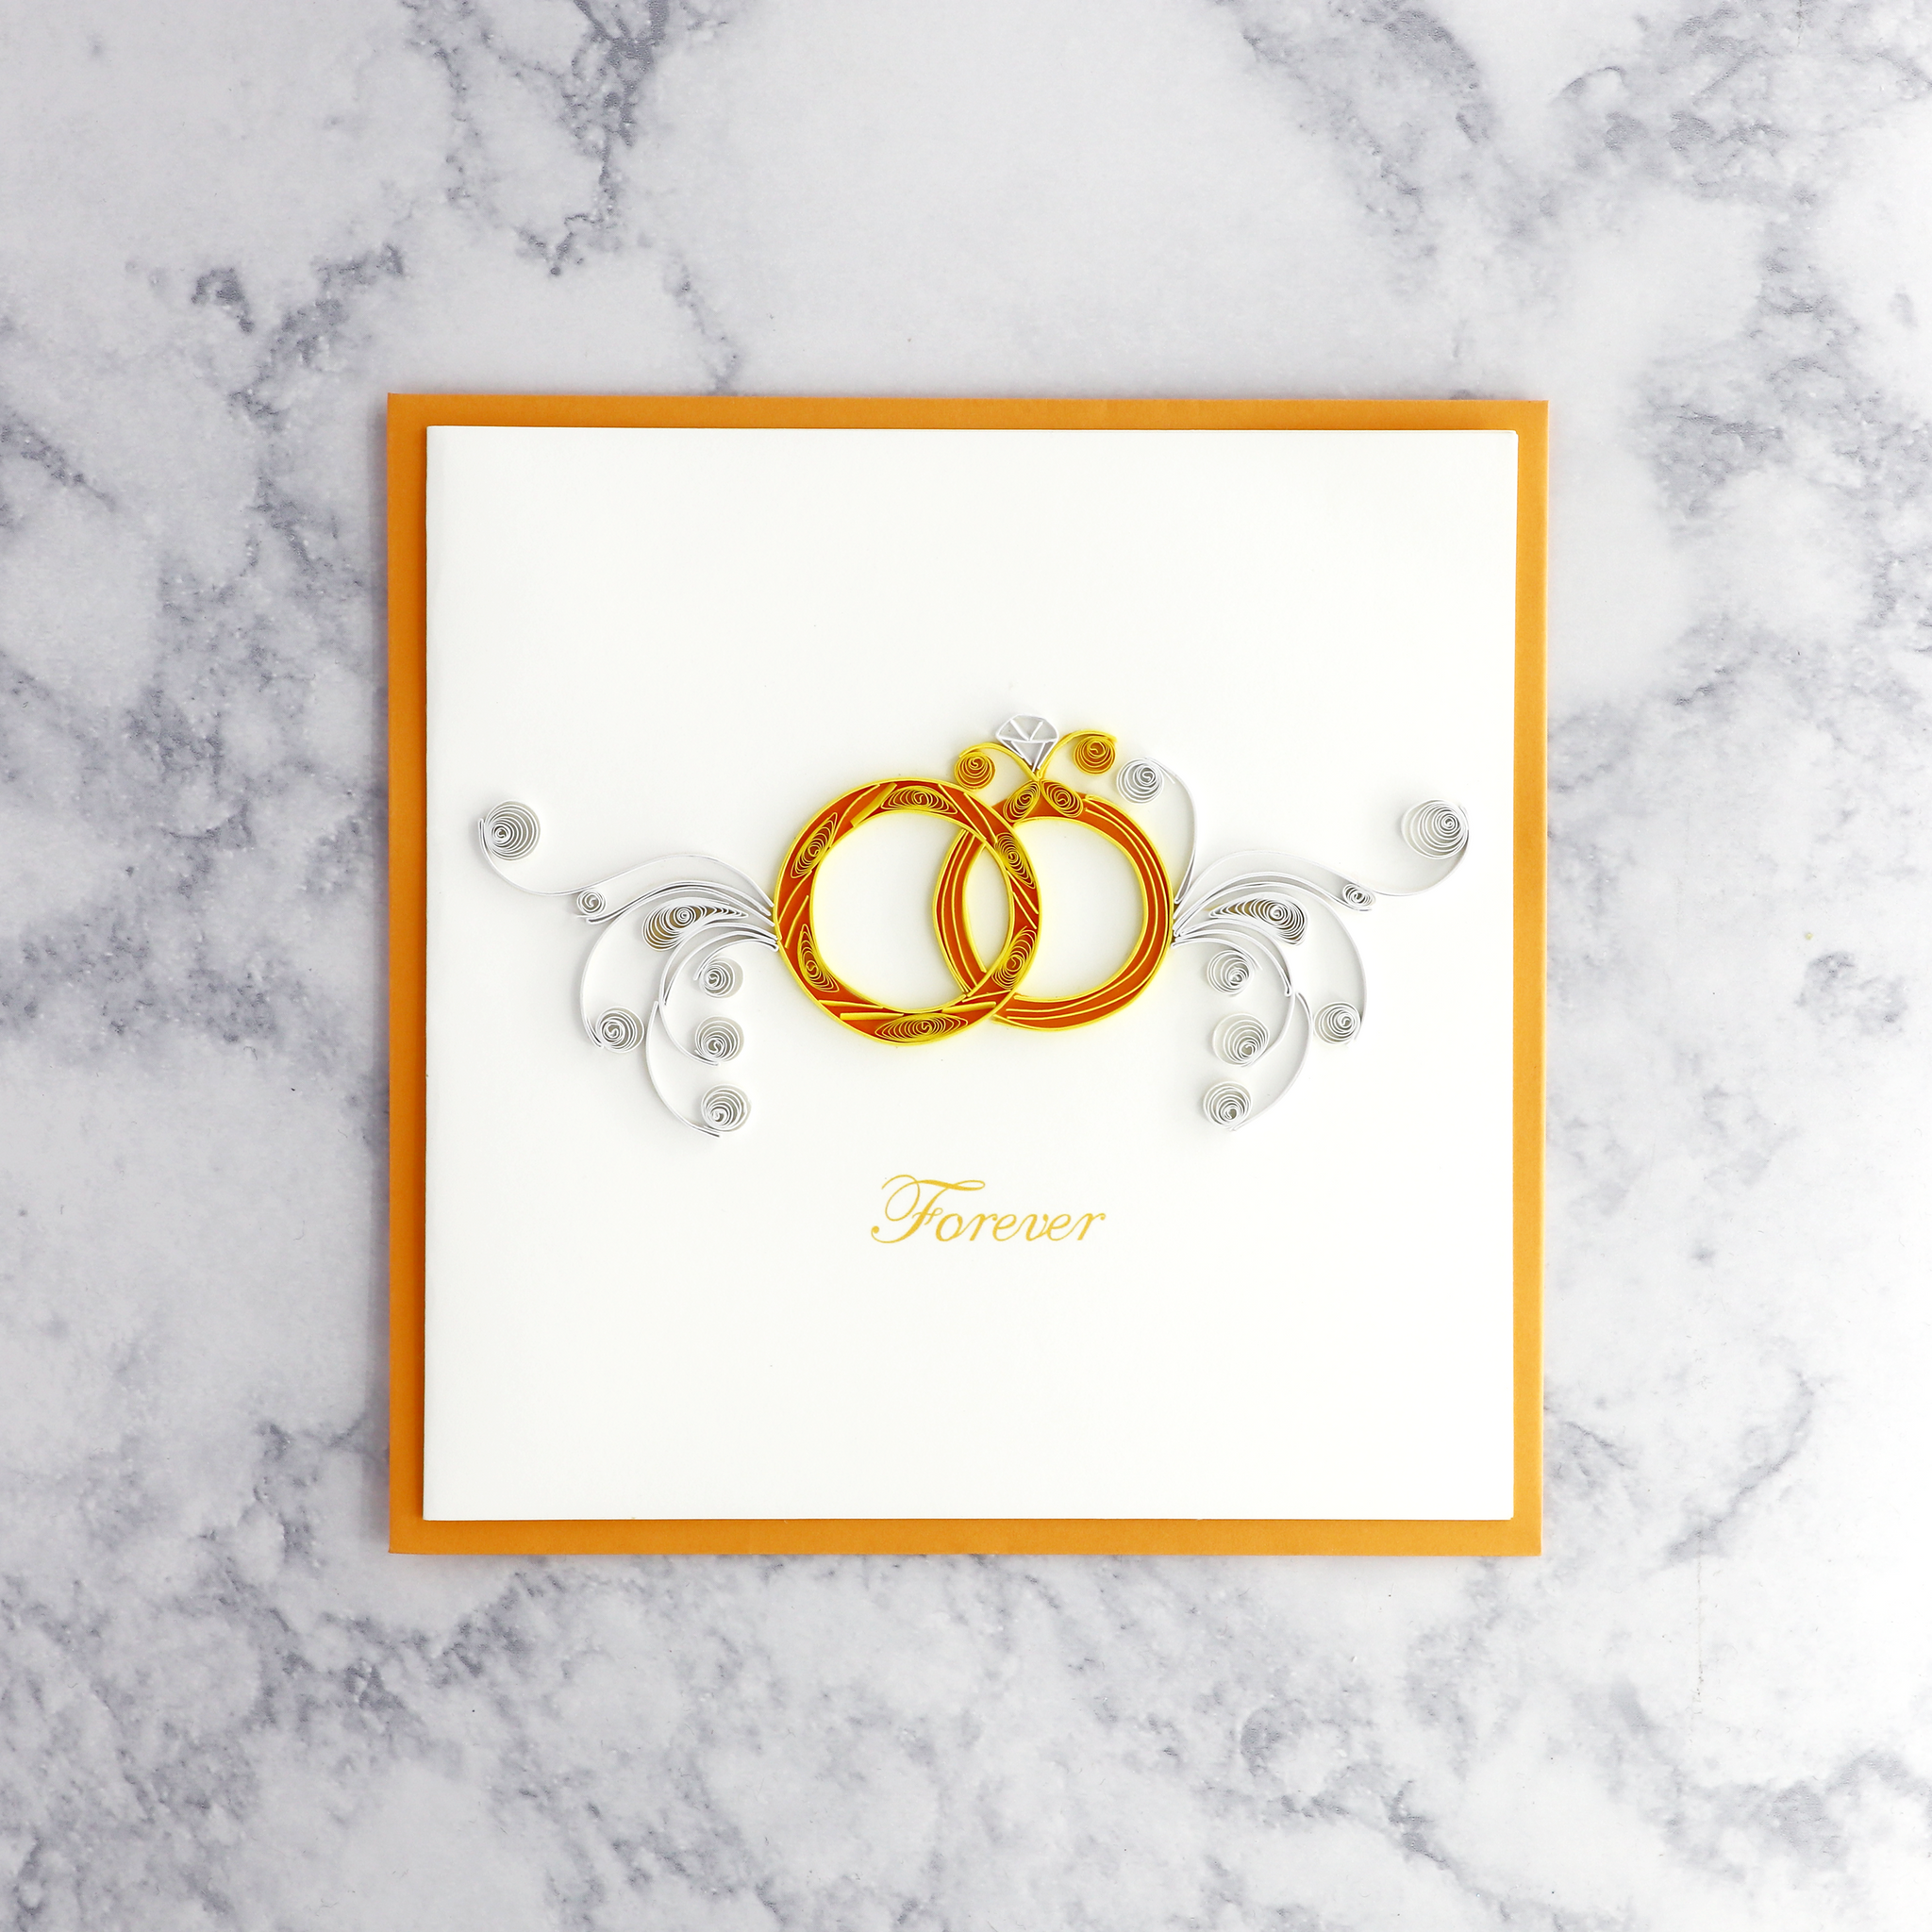 Forever Rings Quilling Wedding Card